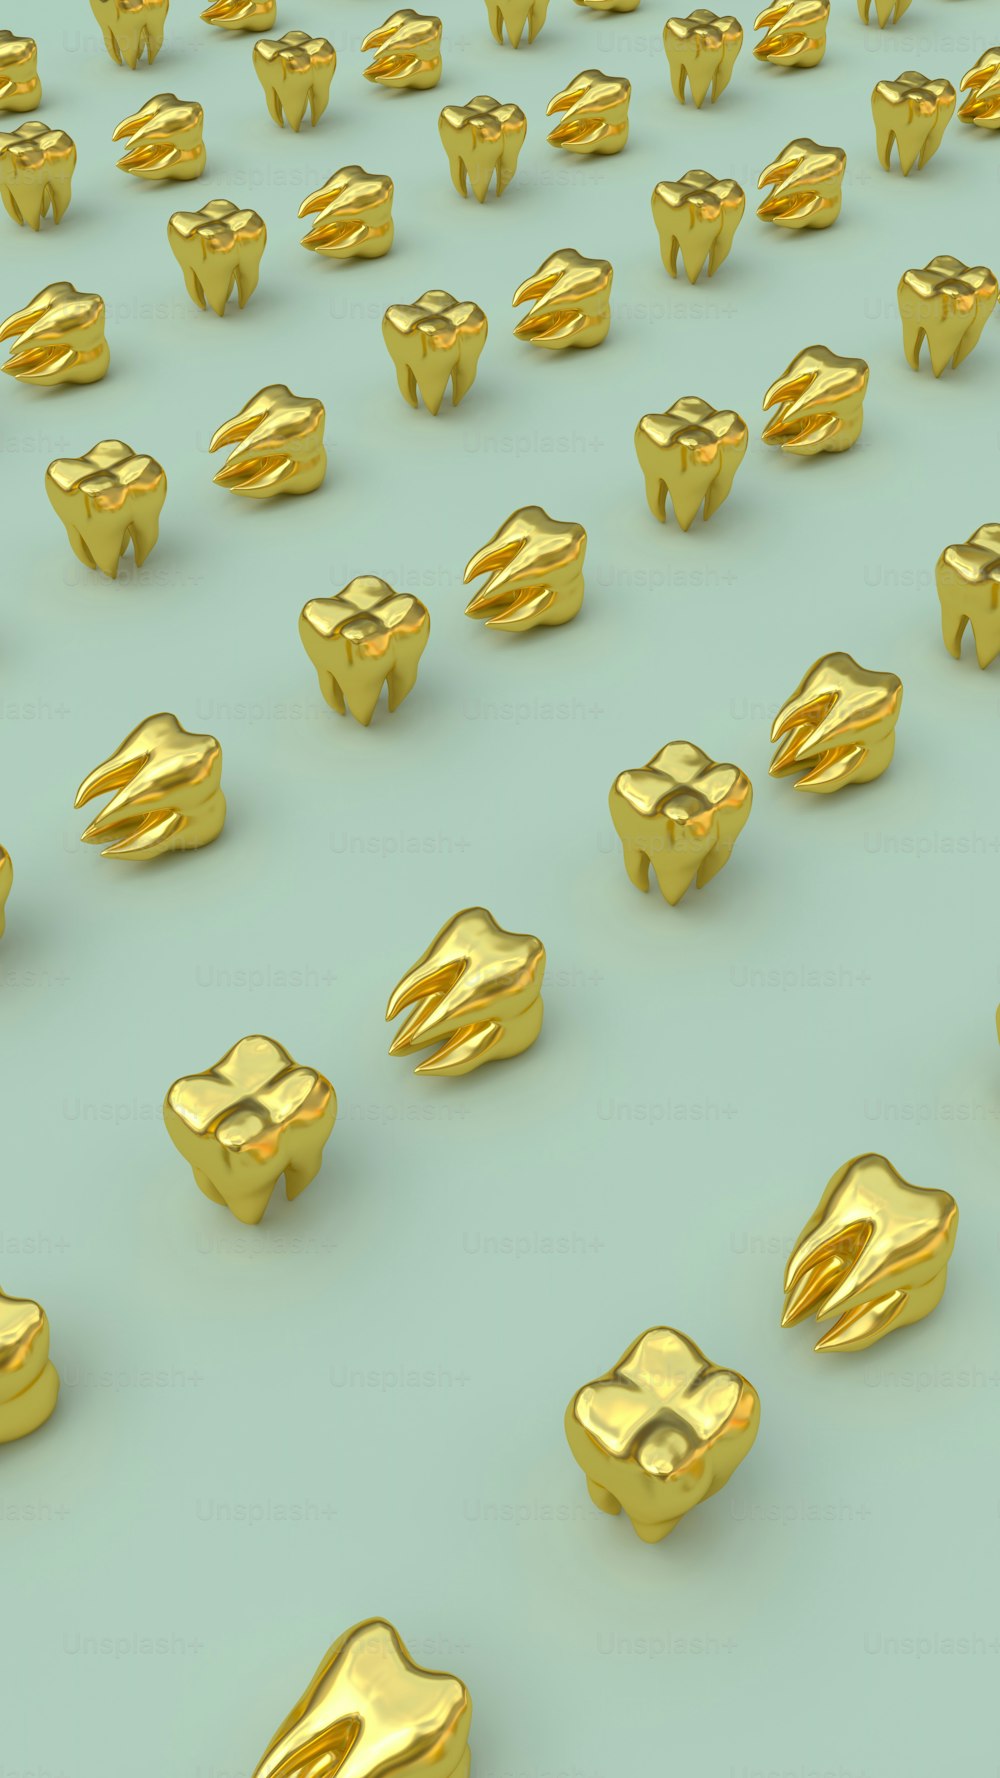 a lot of gold objects that are on a blue surface